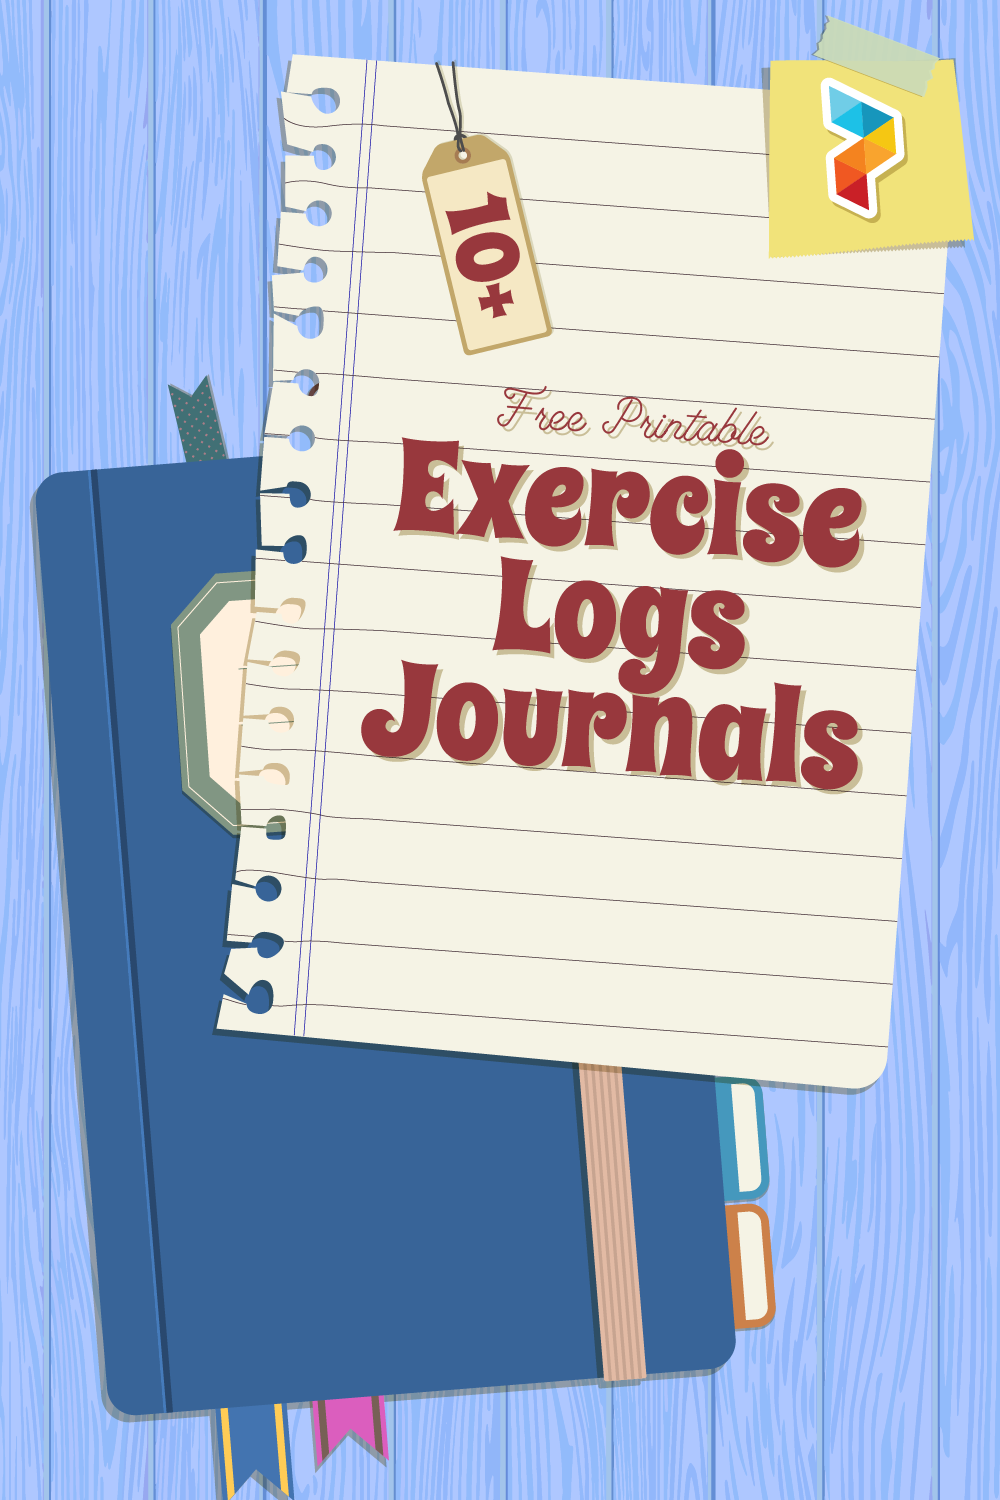 Exercise Logs Journals